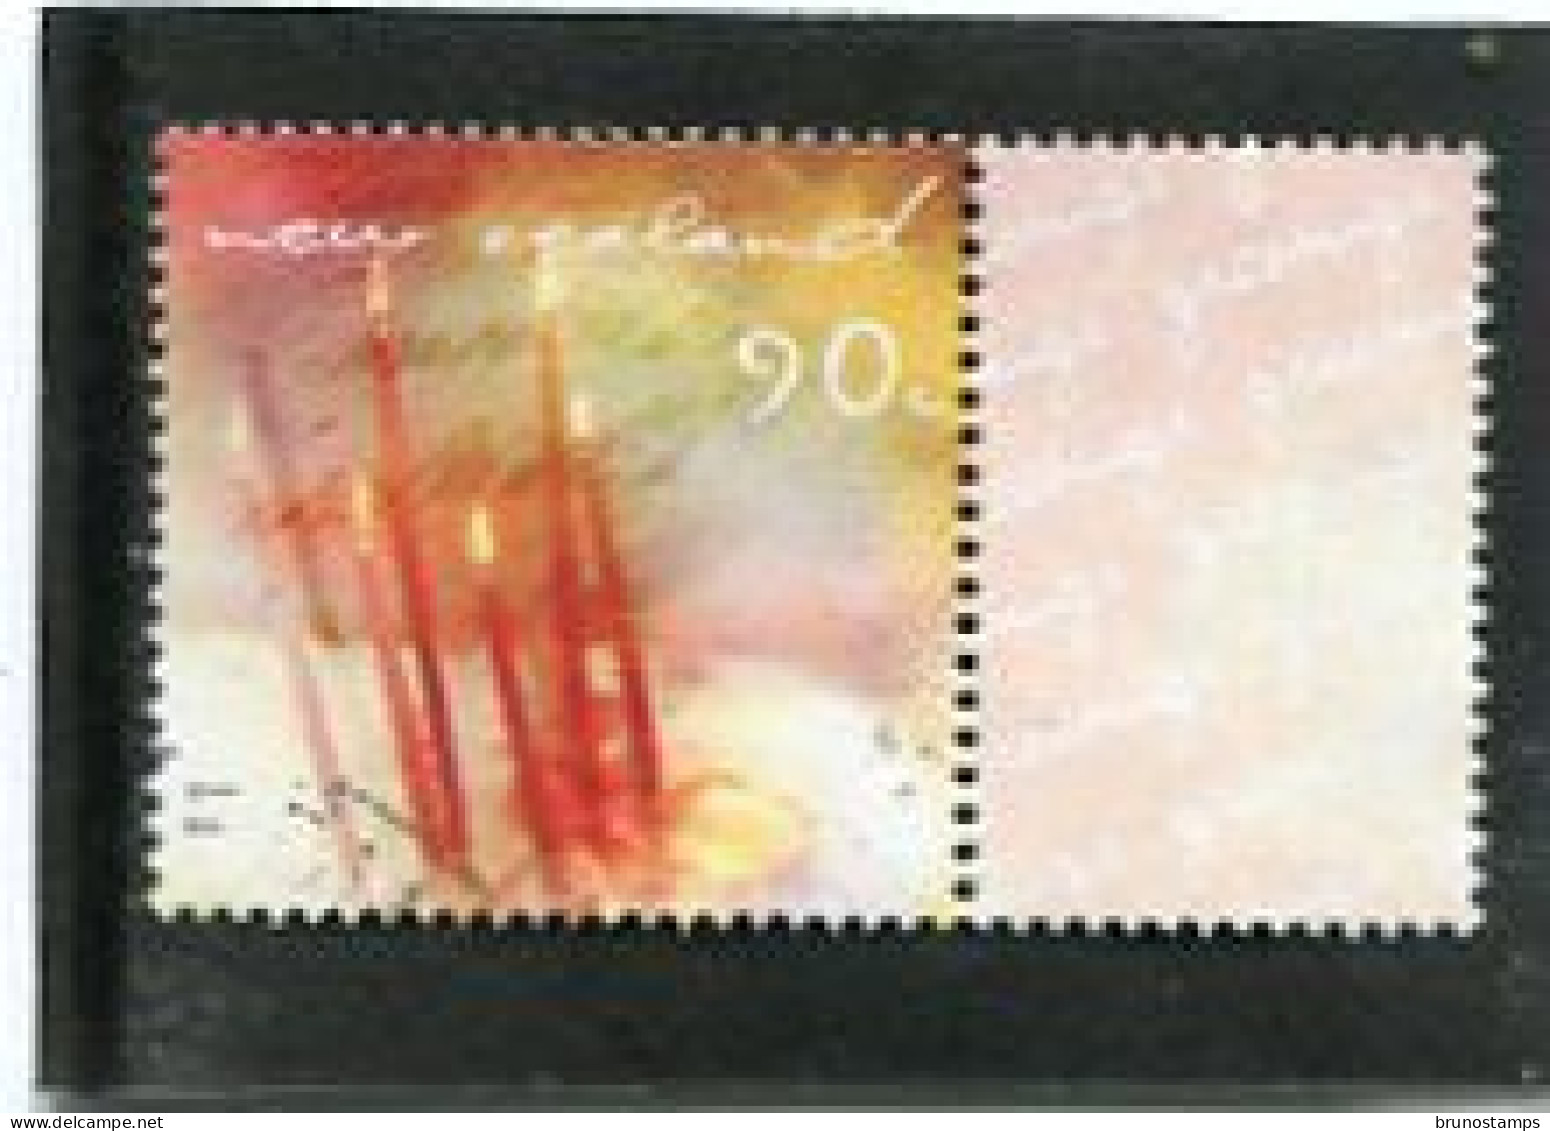 NEW ZEALAND - 2001  90c  GREETINGS  CANDLES  FINE  USED - Usados